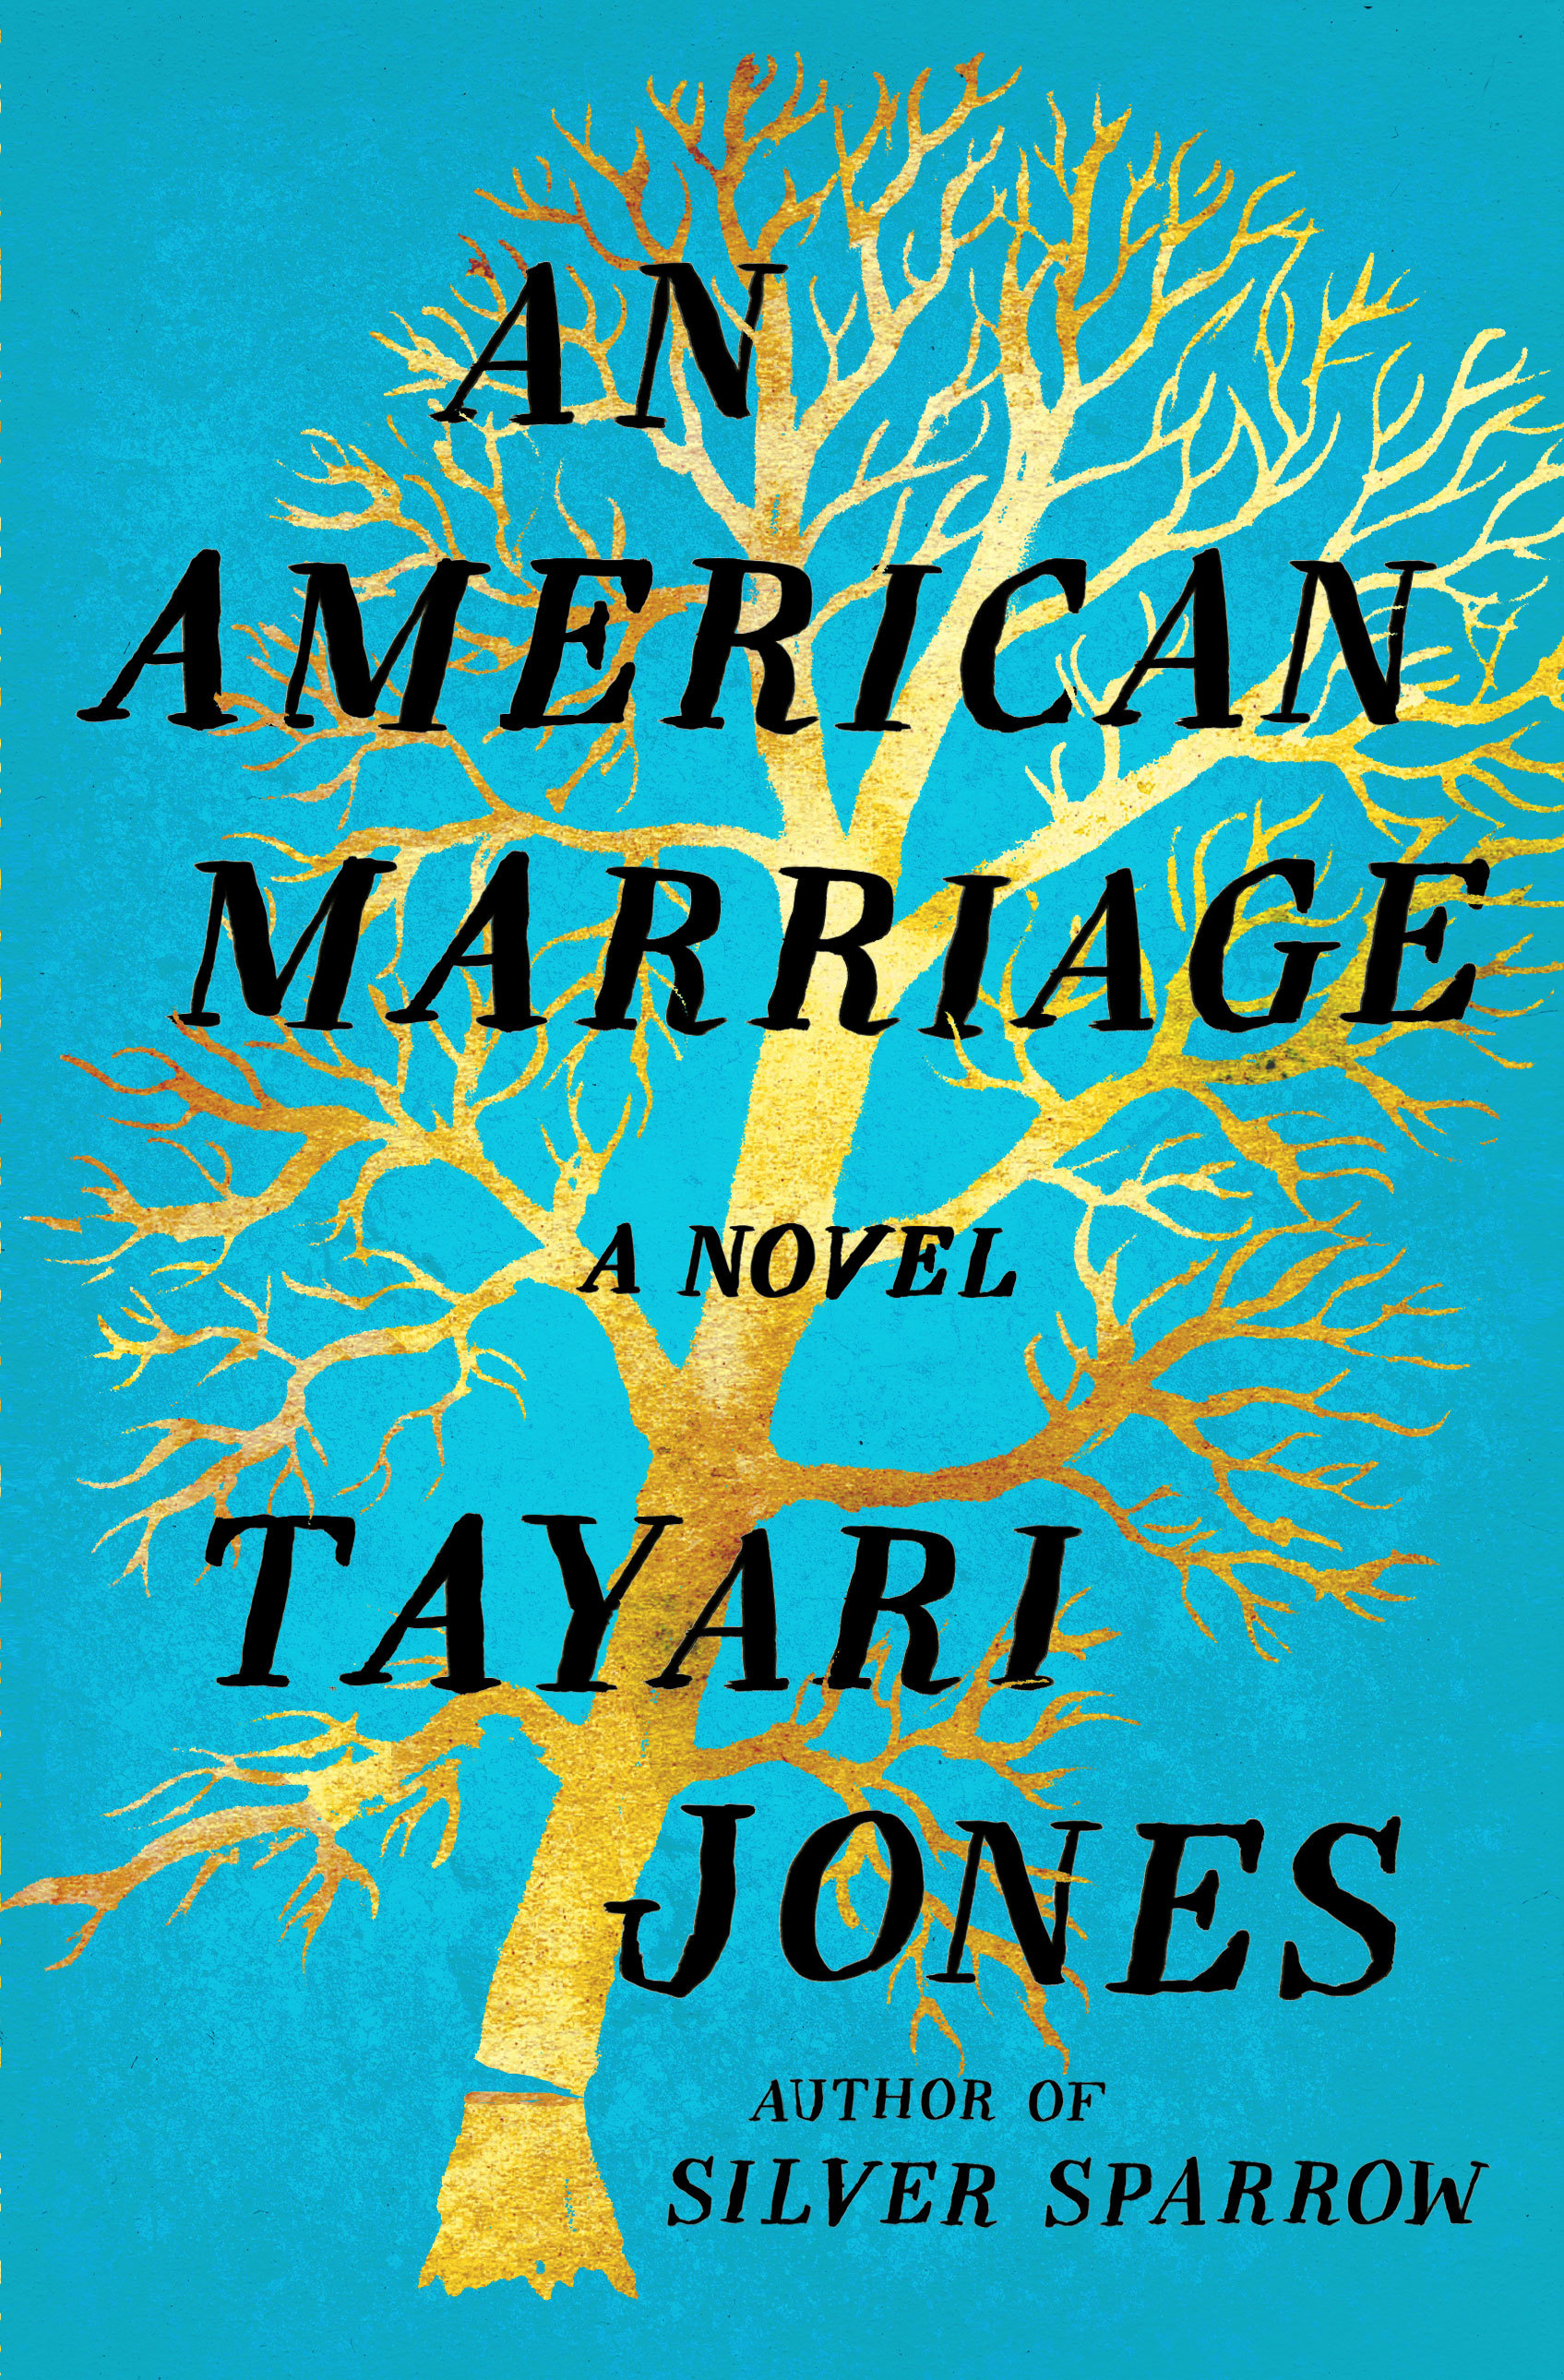 Book Club reads "An American Marriage"